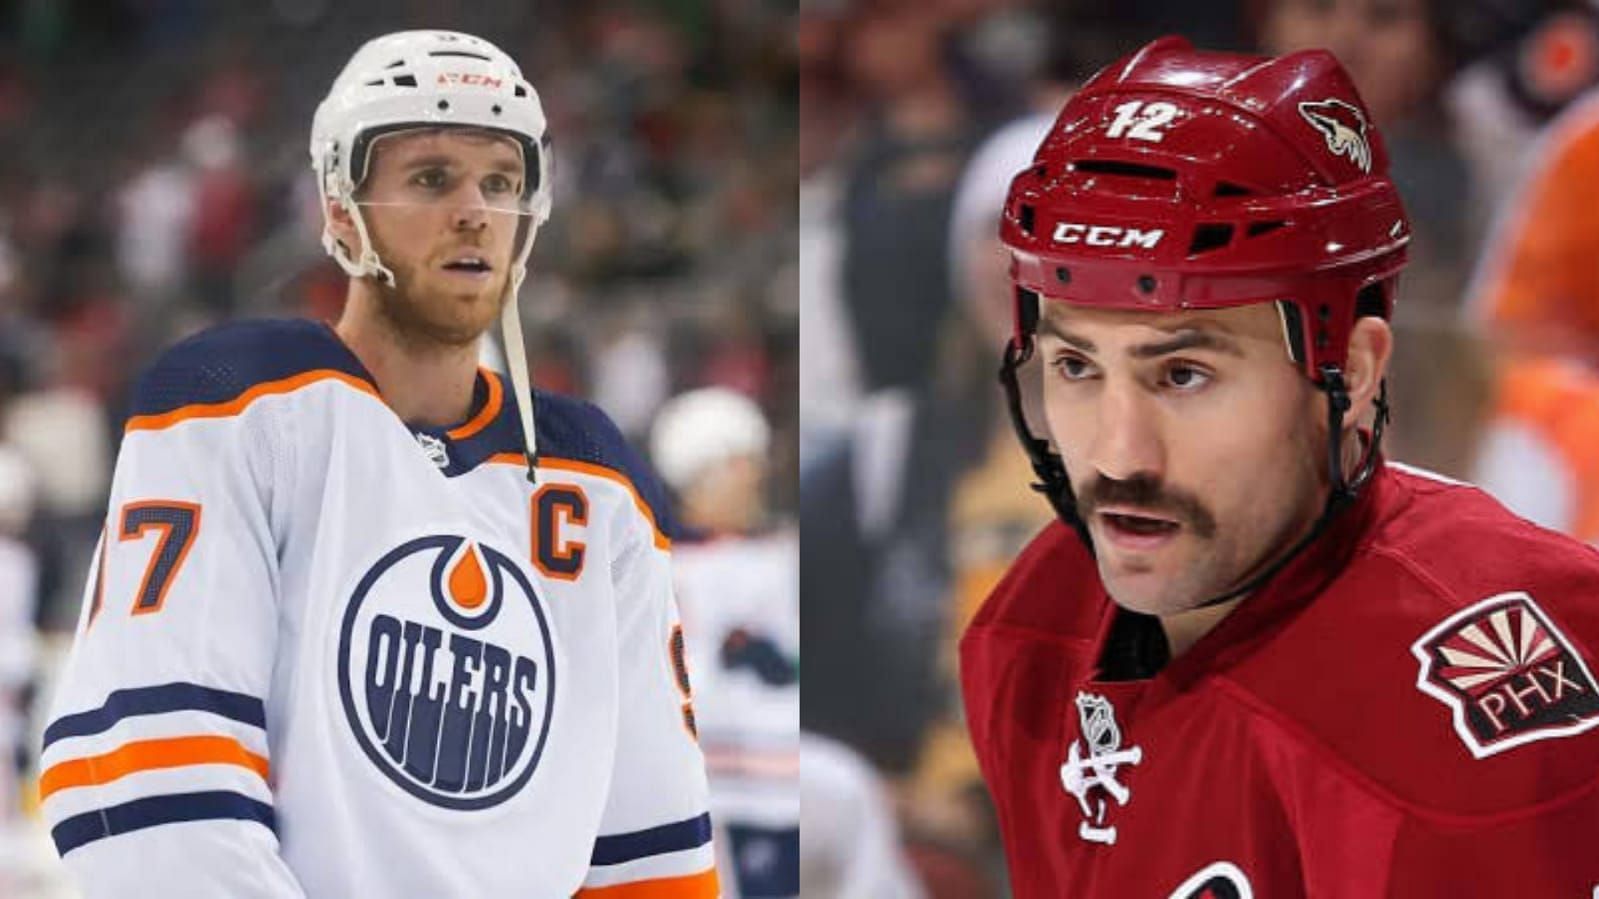 When Connor McDavid made Paul Bissonnette quit his NHL career